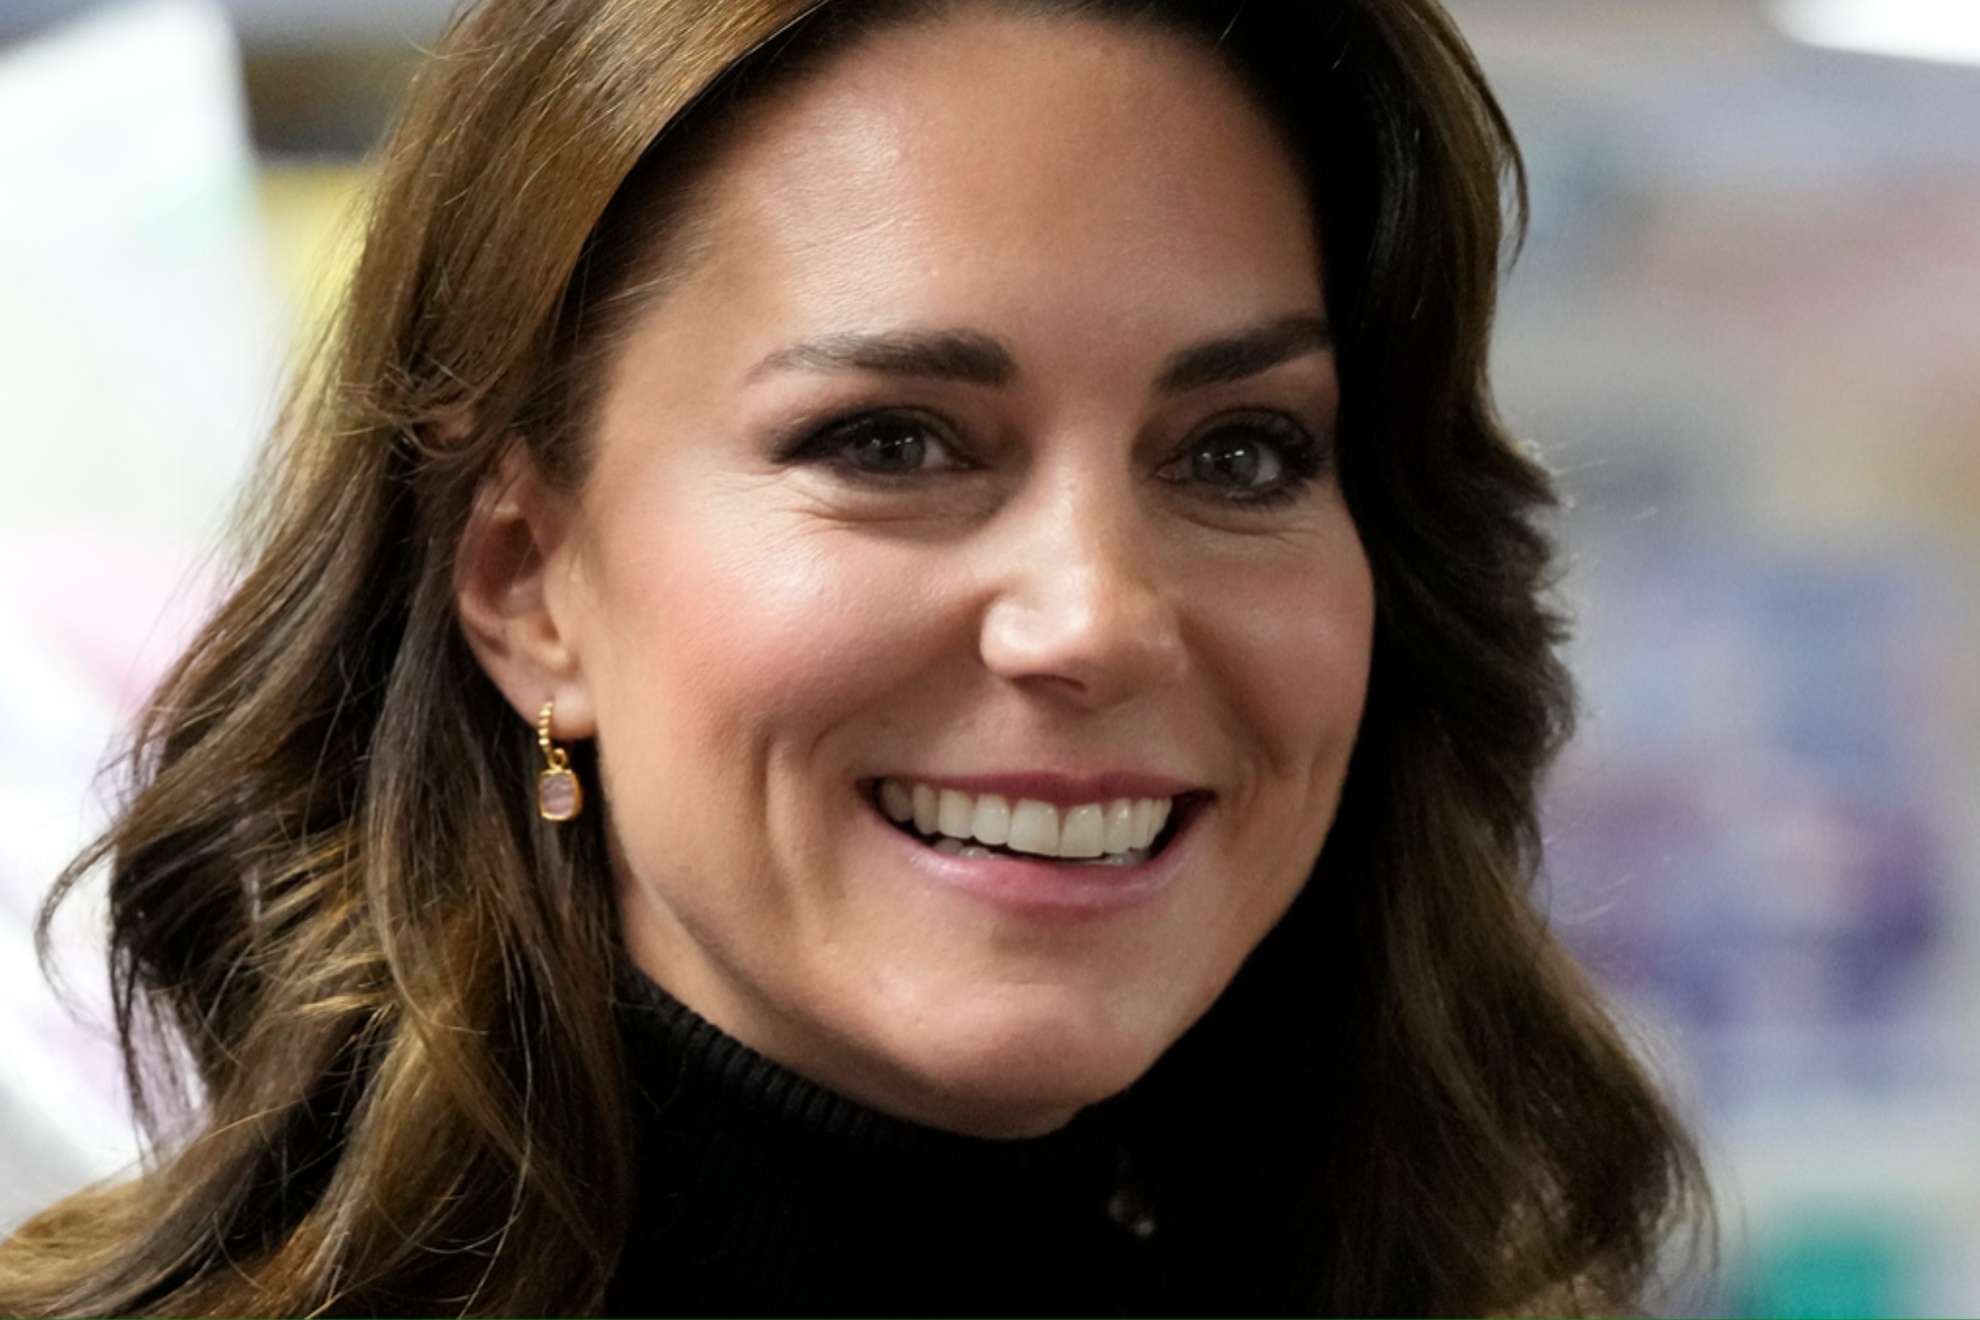 Princess Kate has been the center of controversy since the beginning of the year.